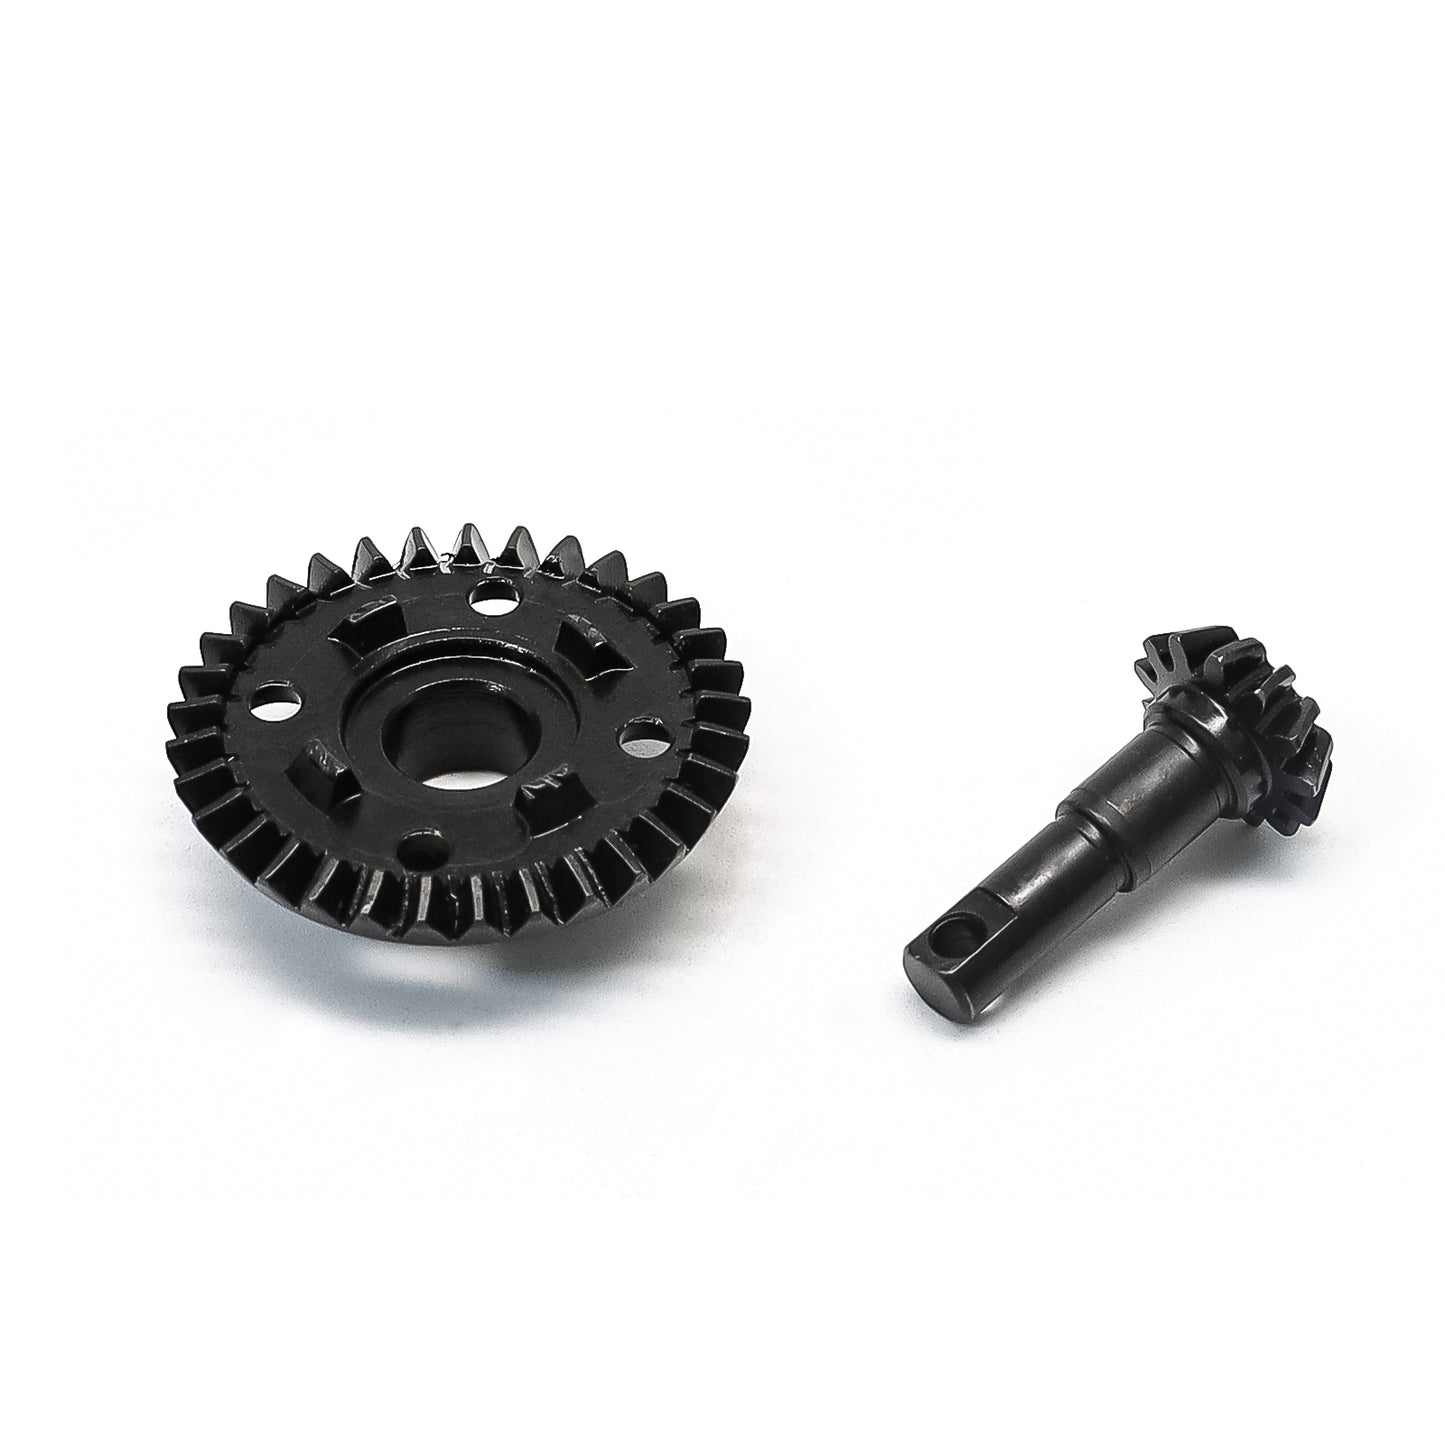 TREAL TRX-4 Overdrive Ring and Pinion Gears Set 13T/33T Differential Machined OD Gears